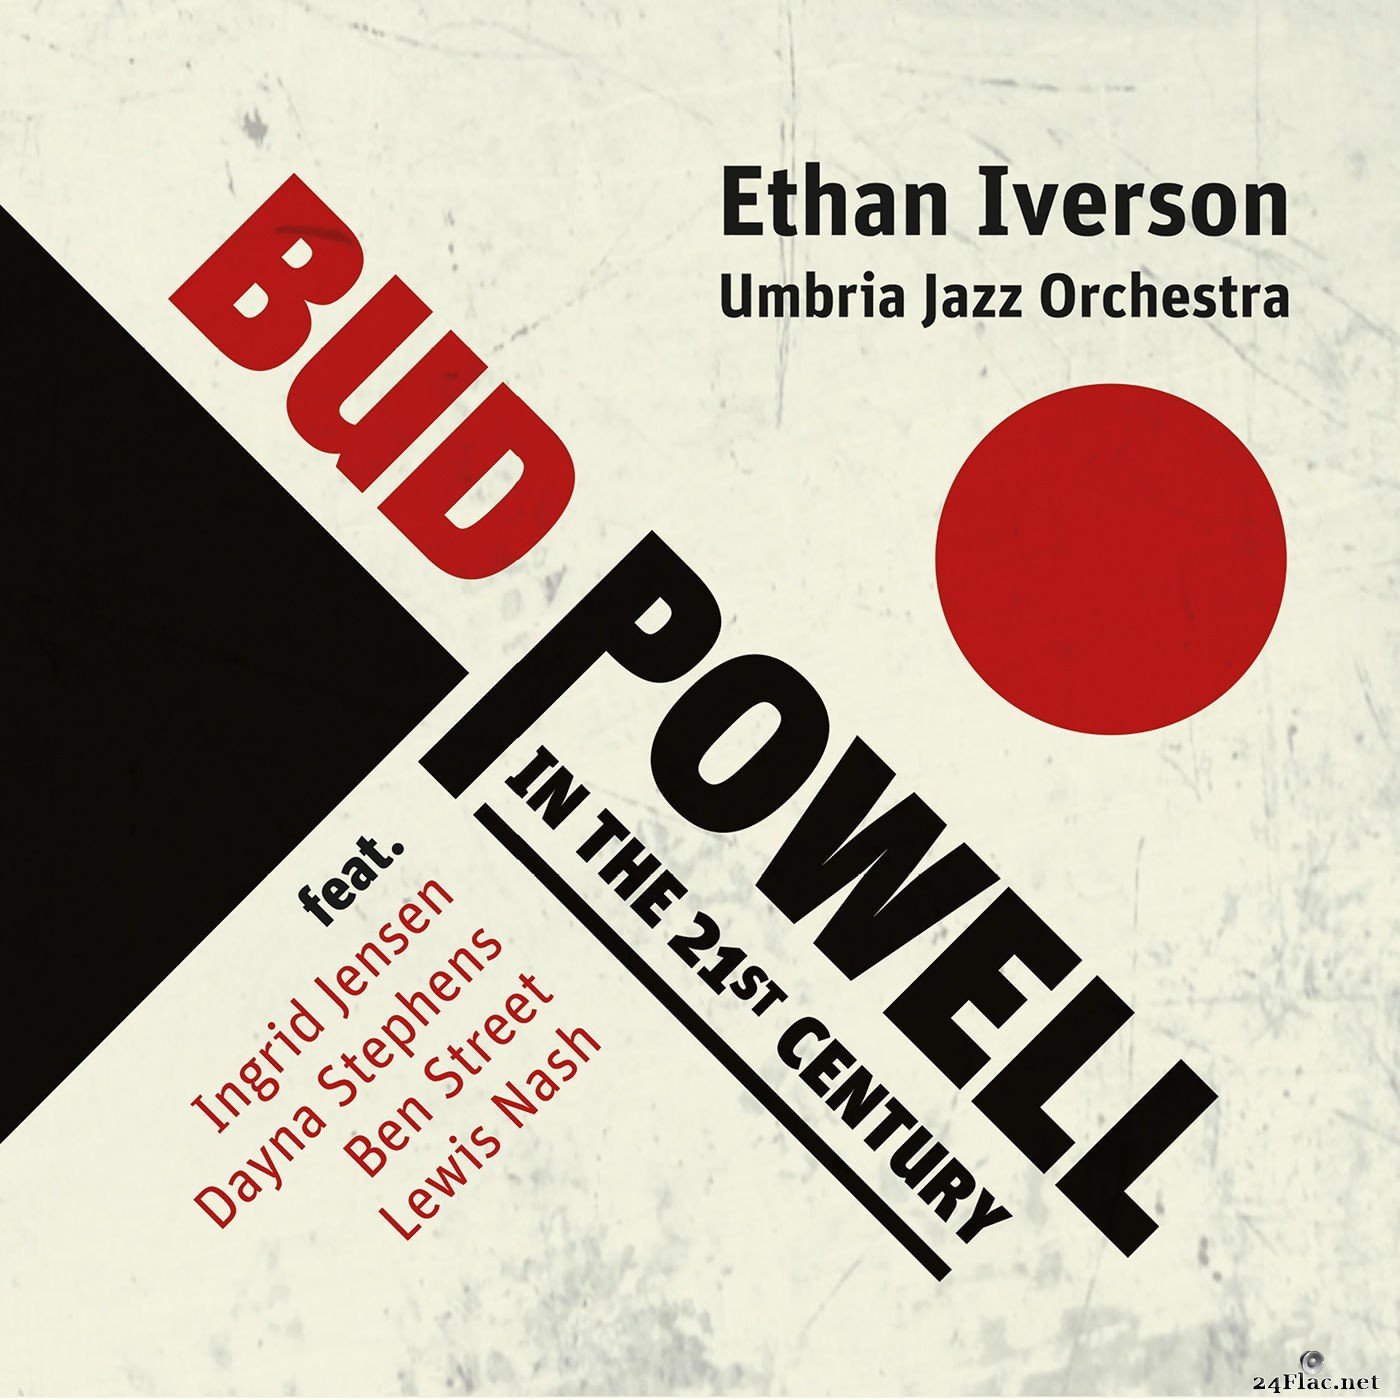 Ethan Iverson - Bud Powell in the 21st Century (2021) Hi-Res